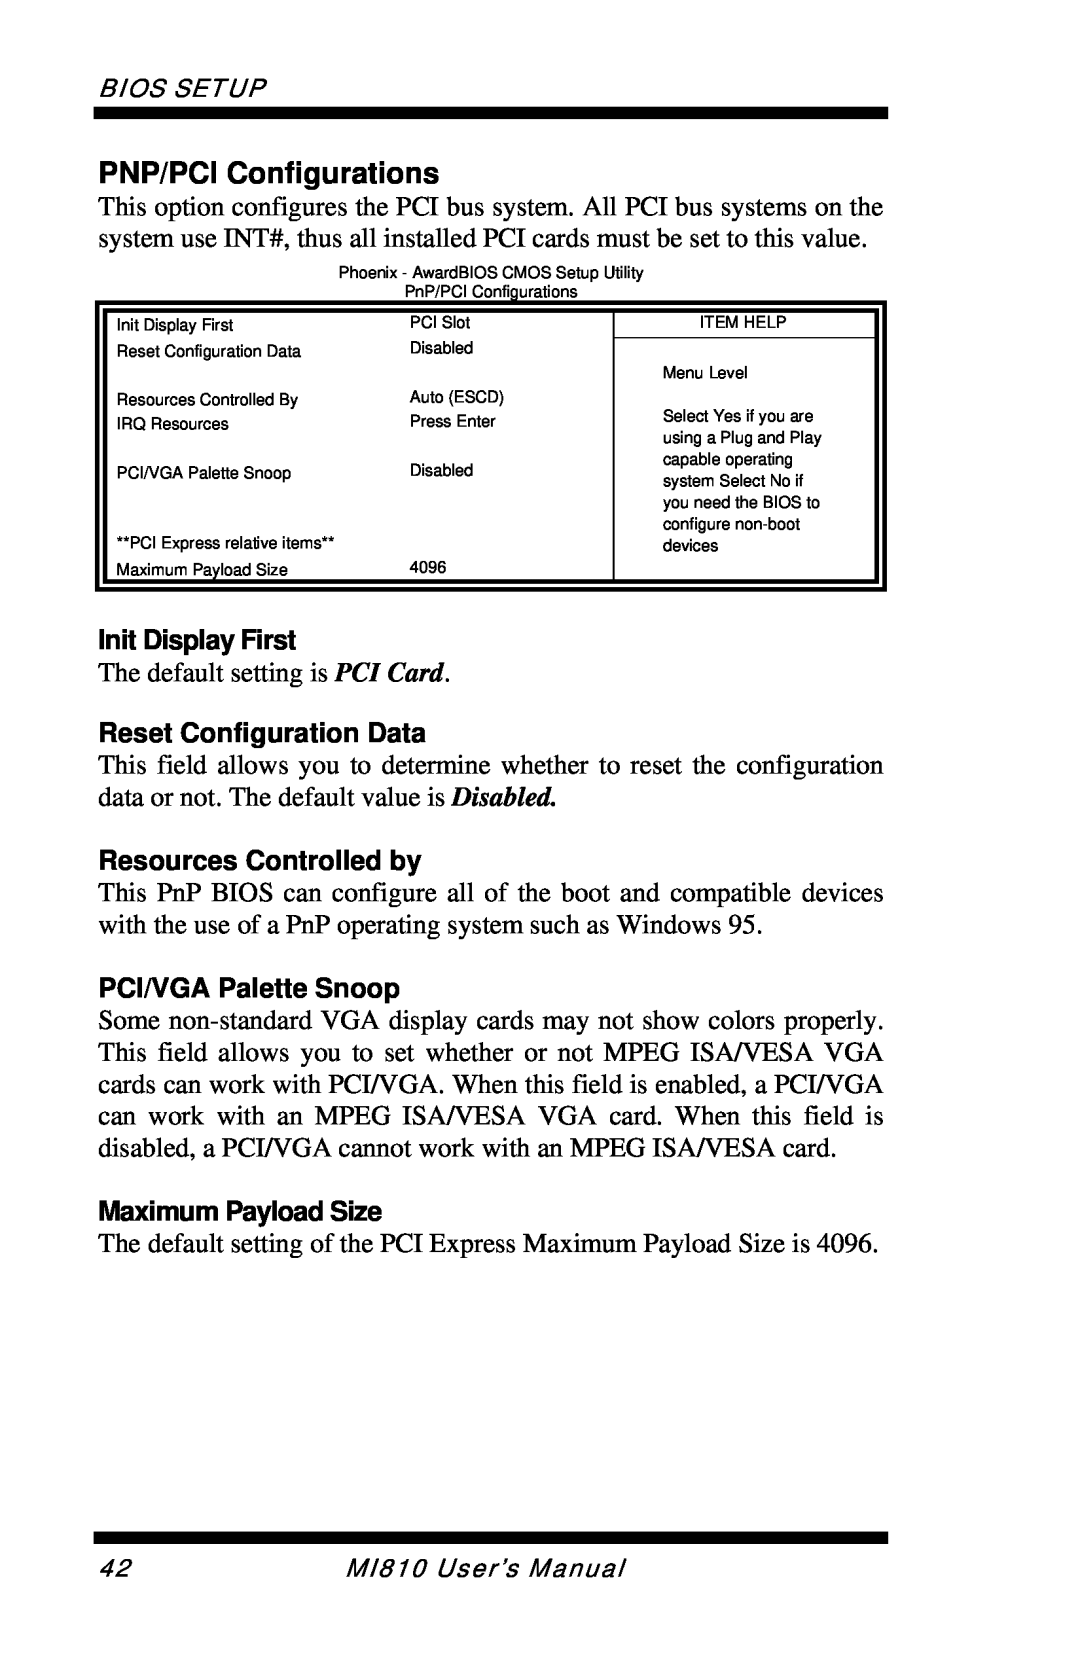 Intel MI810 user manual PNP/PCI Configurations, Init Display First, Reset Configuration Data, Resources Controlled by 